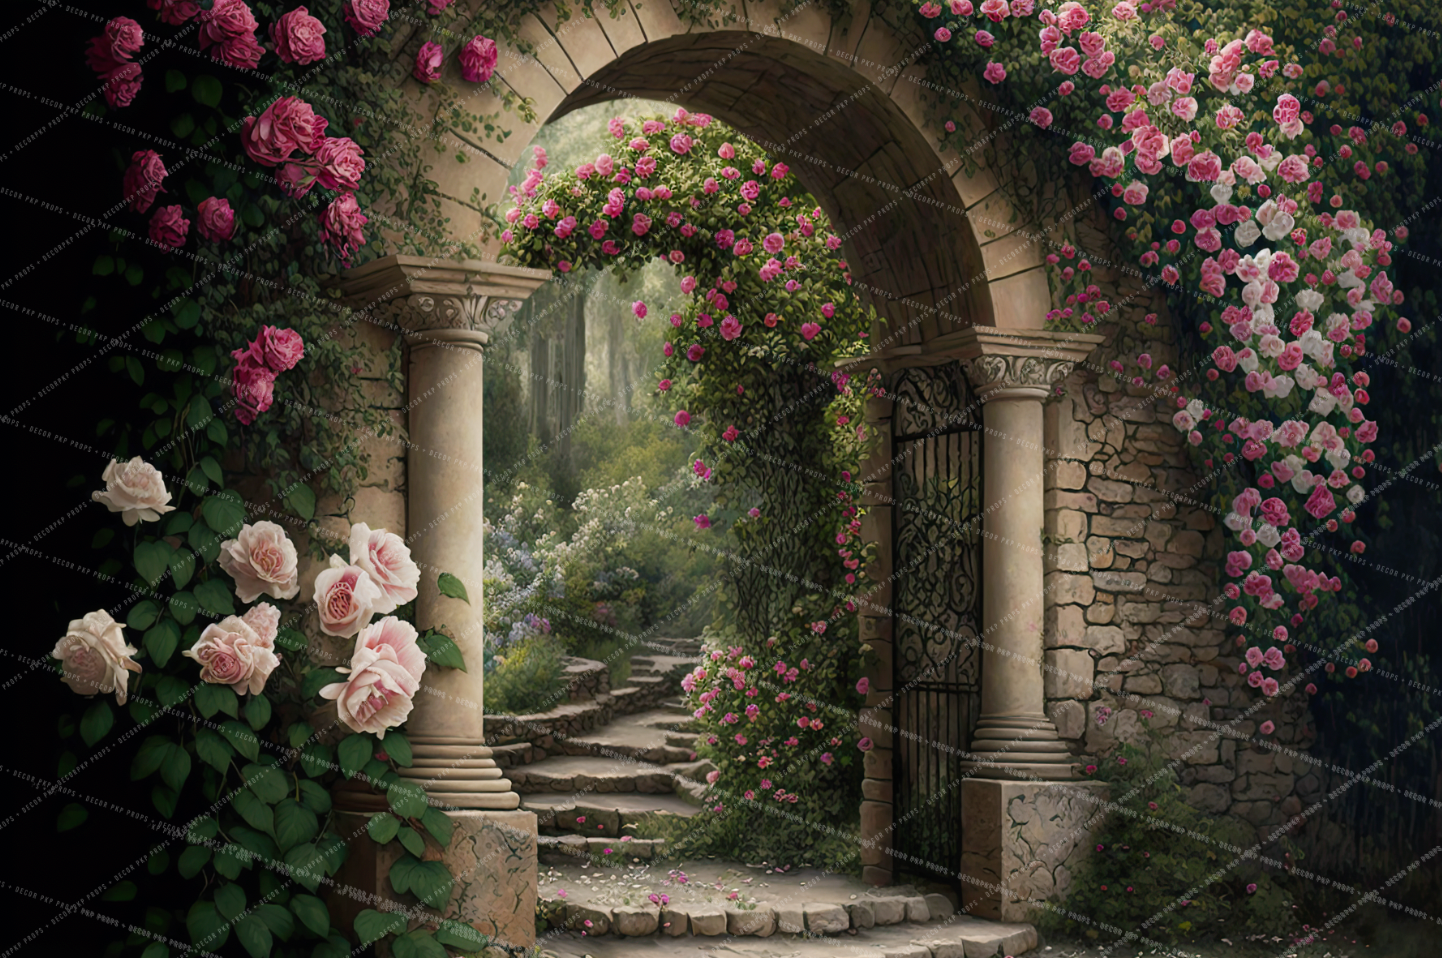 PINK ROSE ARCH - PKP